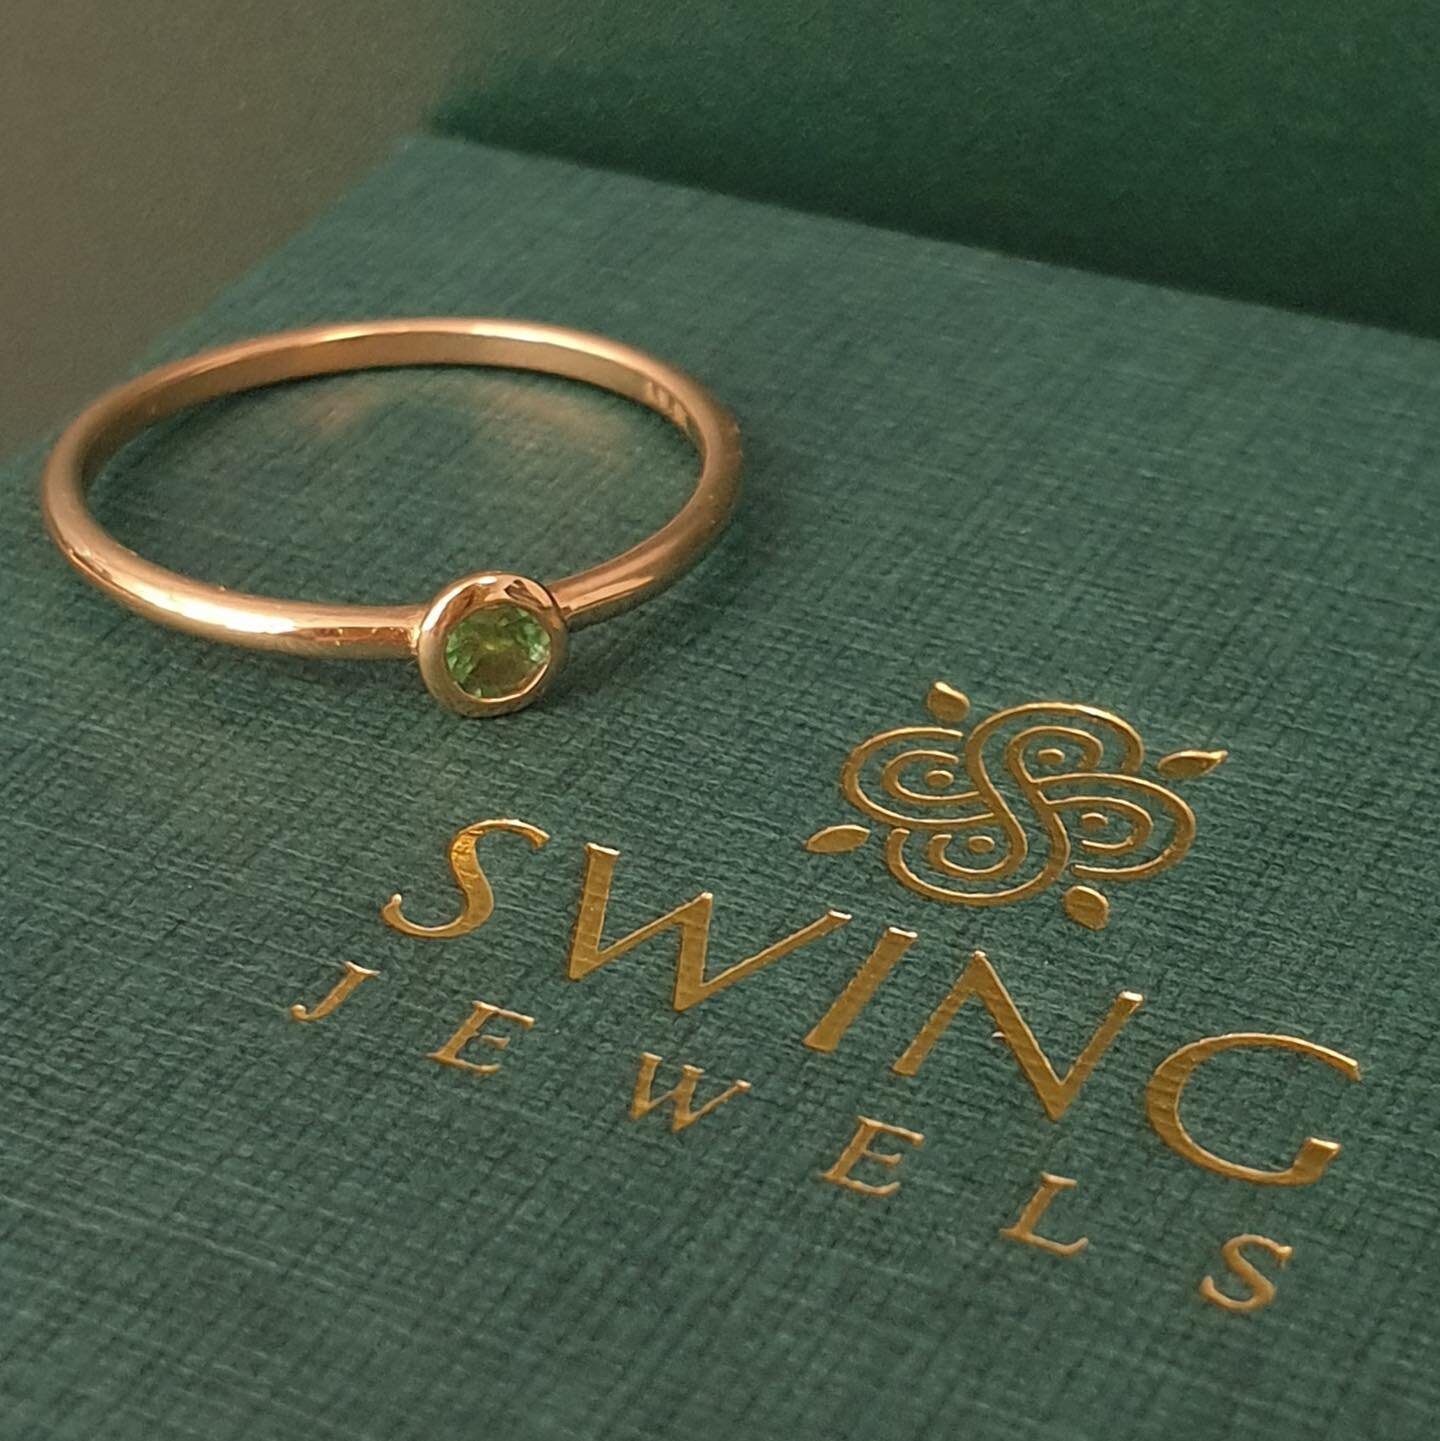 Happy May! 
A new month means a new birthstone! Emerald gives you wisdom and patience.
💚 available in 14K and 18K gold and sterling silver 💚

#swingjewels #emerald #smaragd #birthstonejewelry #geboortesteen #14kgold #18kgold #sterlingsilver